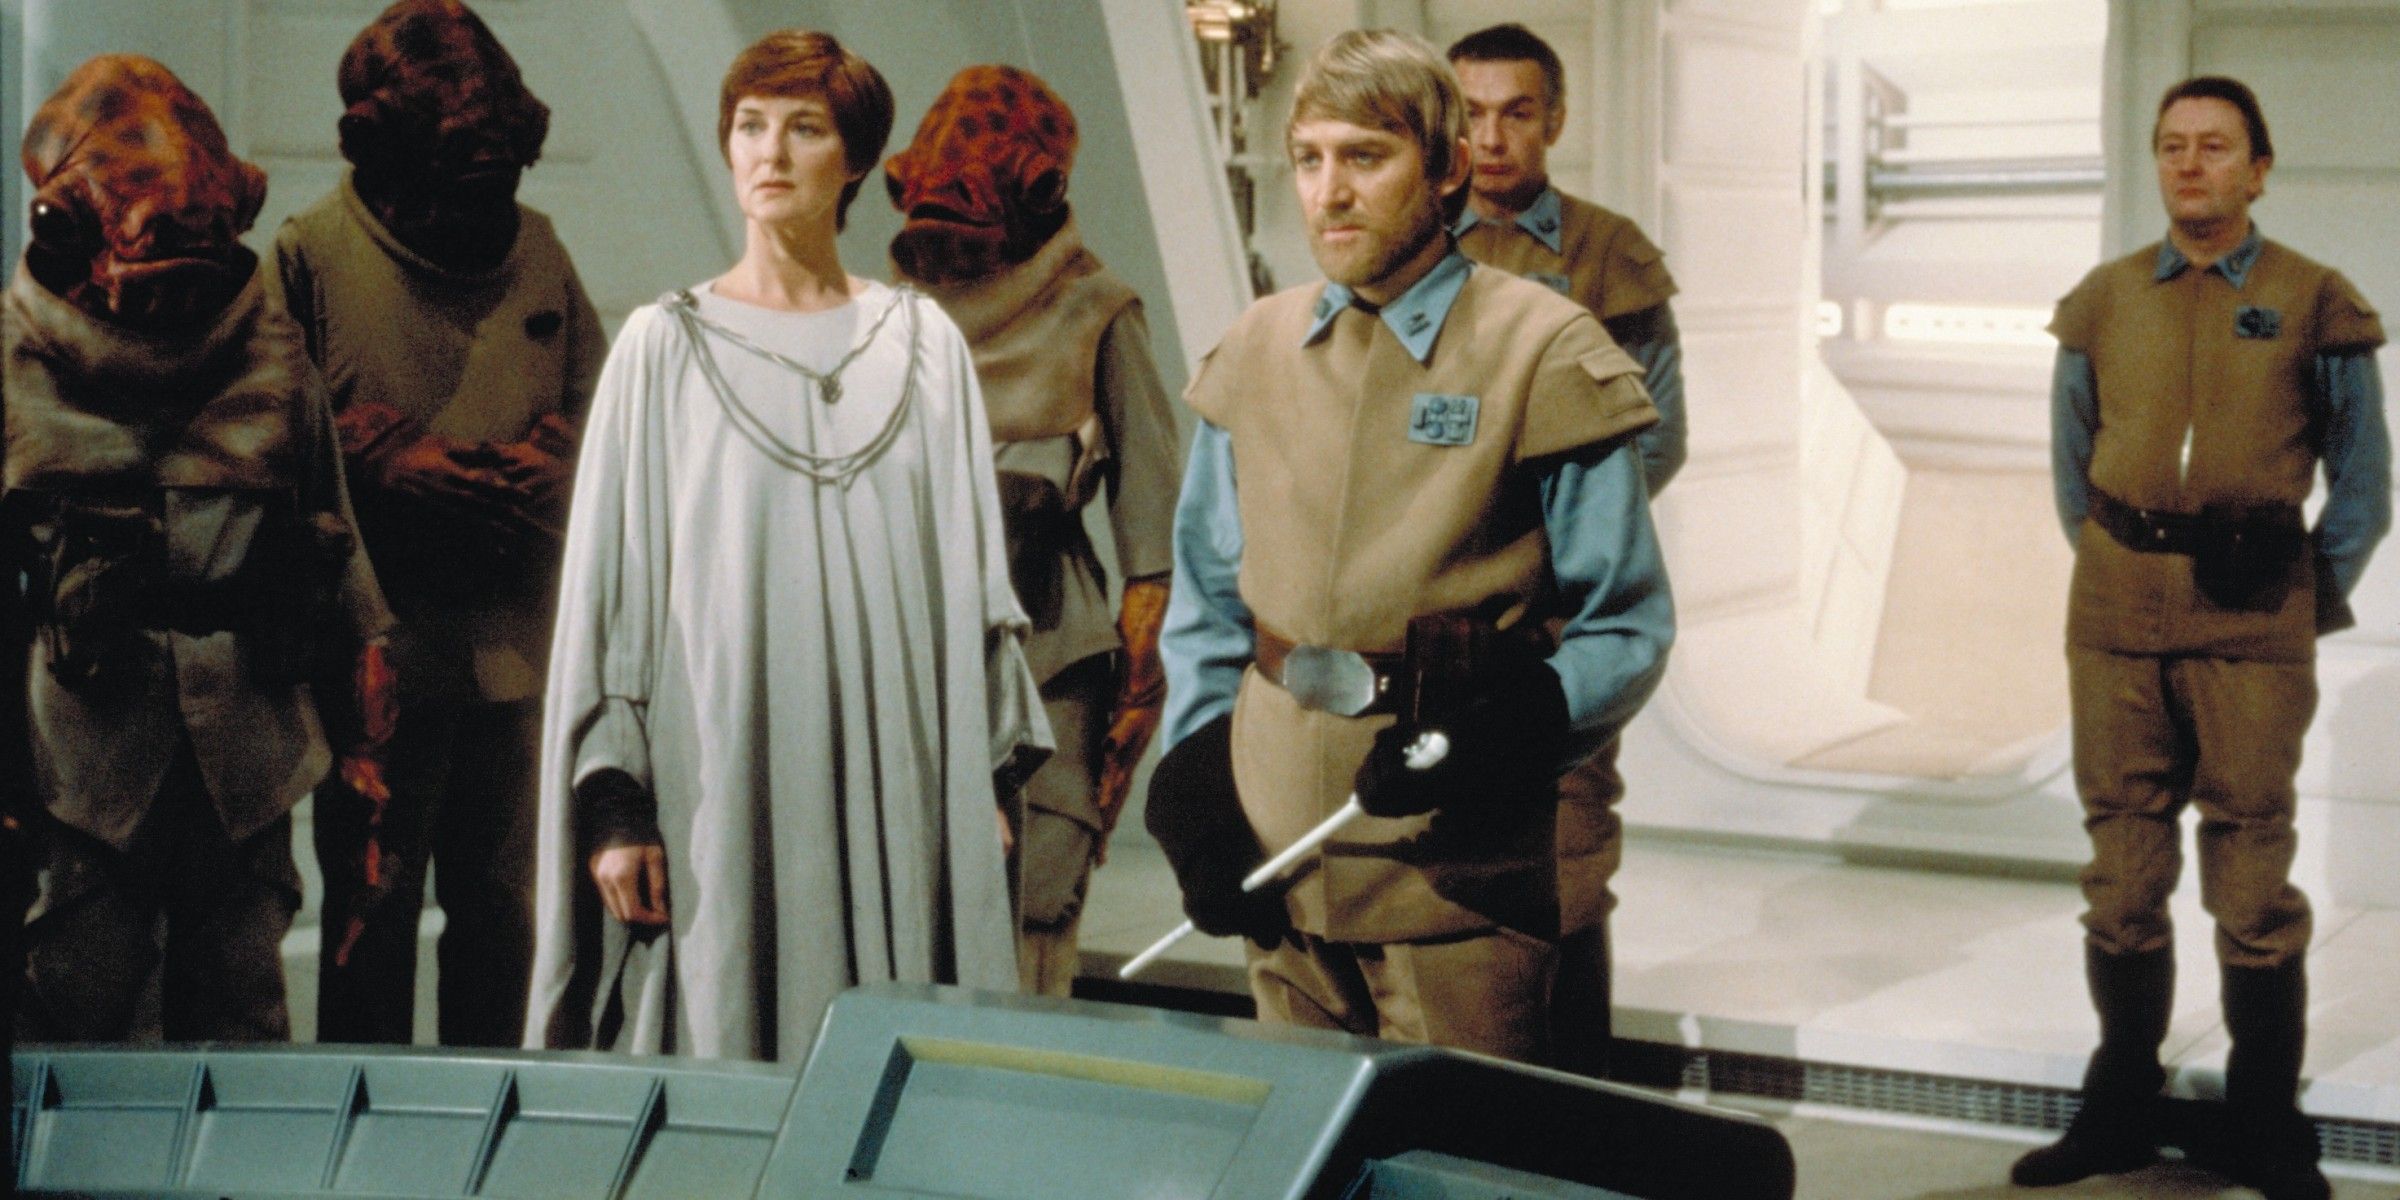 MonMothma briefs the rebels on the mission to destroy the Second Death Star in Return of the Jedi